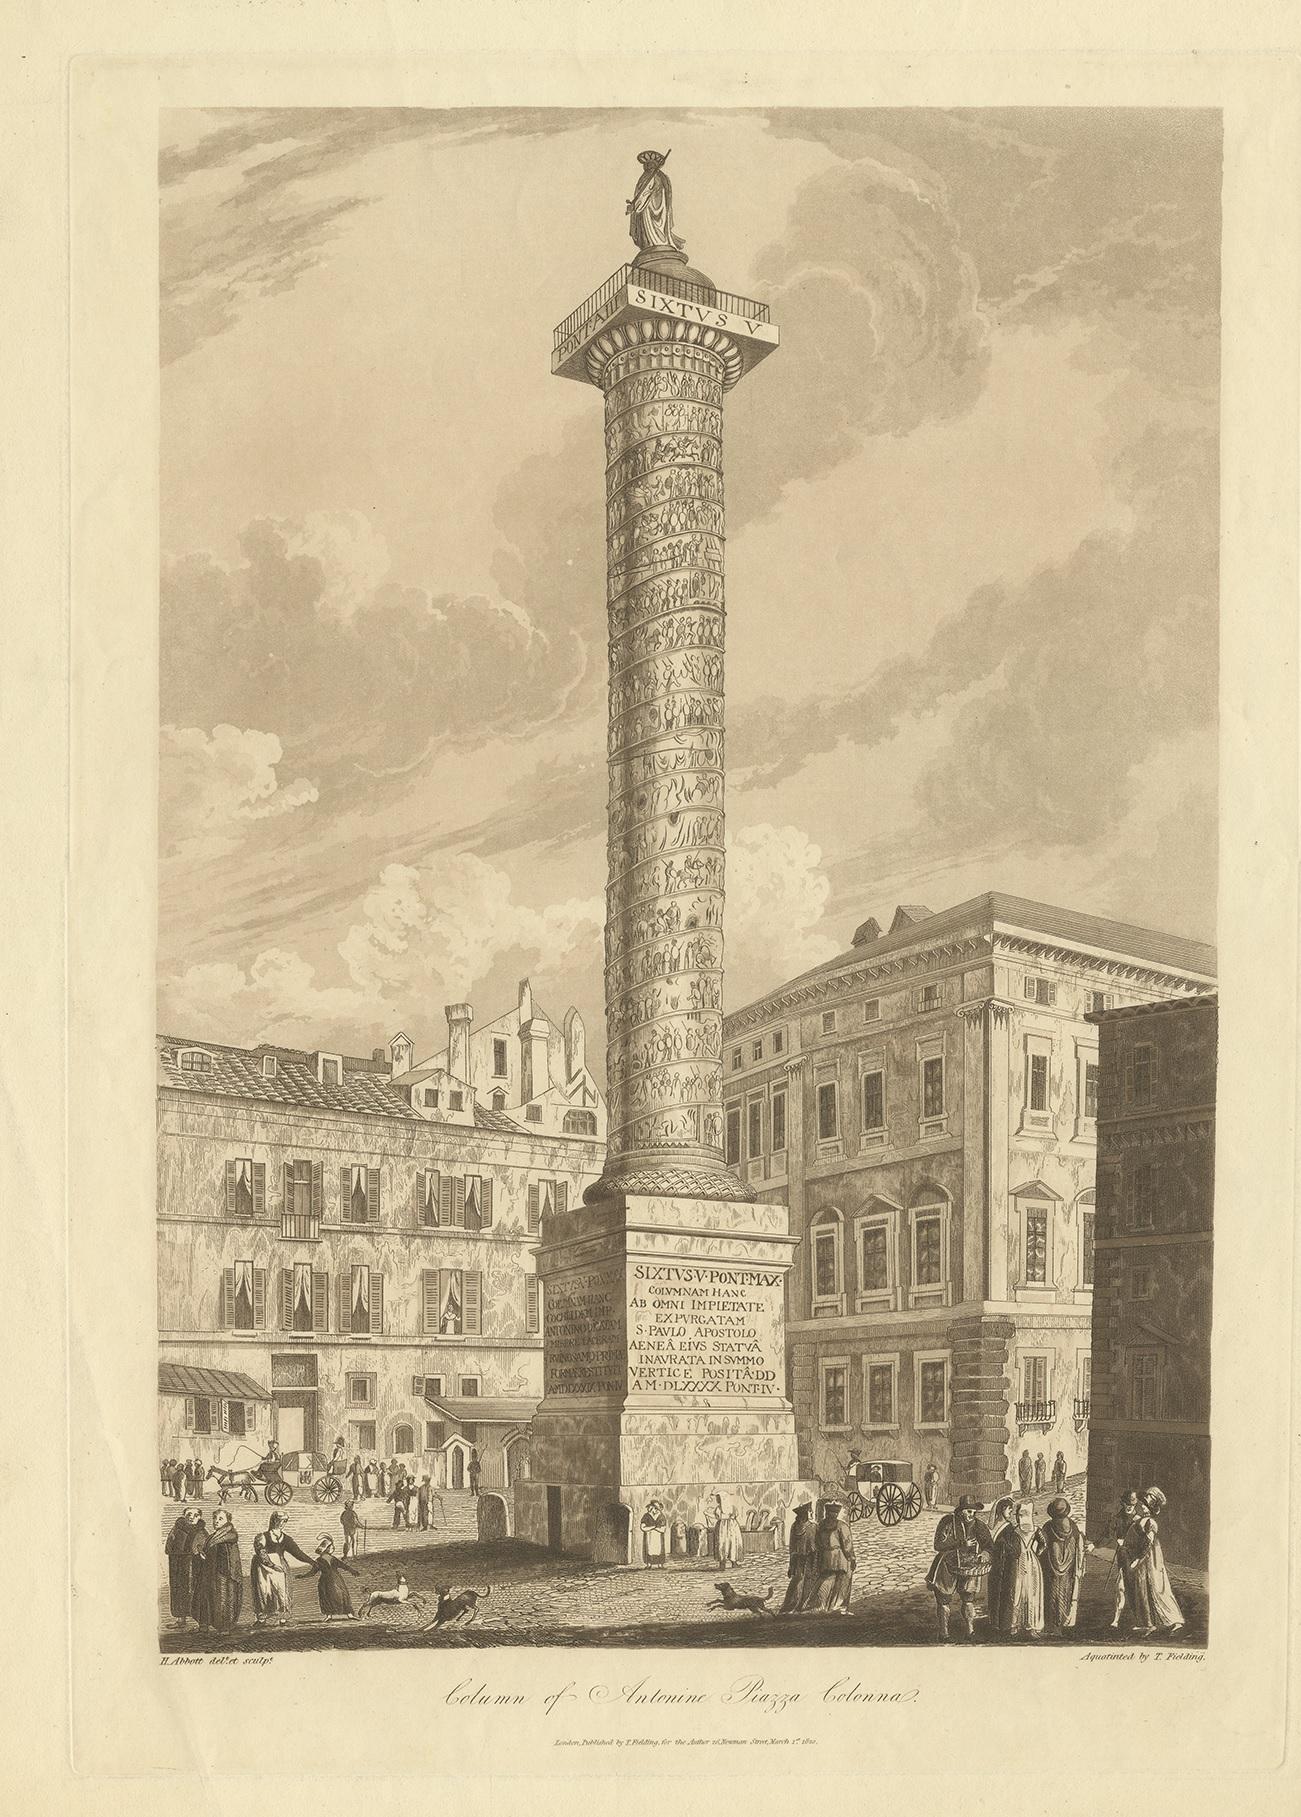 Antique print titled 'Column of Antonine Piazza Colonna'. Large aquatint of the Column of Marcus Aurelius. The Column of Marcus Aurelius is a Roman victory column in Piazza Colonna, Rome, Italy. It is a Doric column featuring a spiral relief: it was